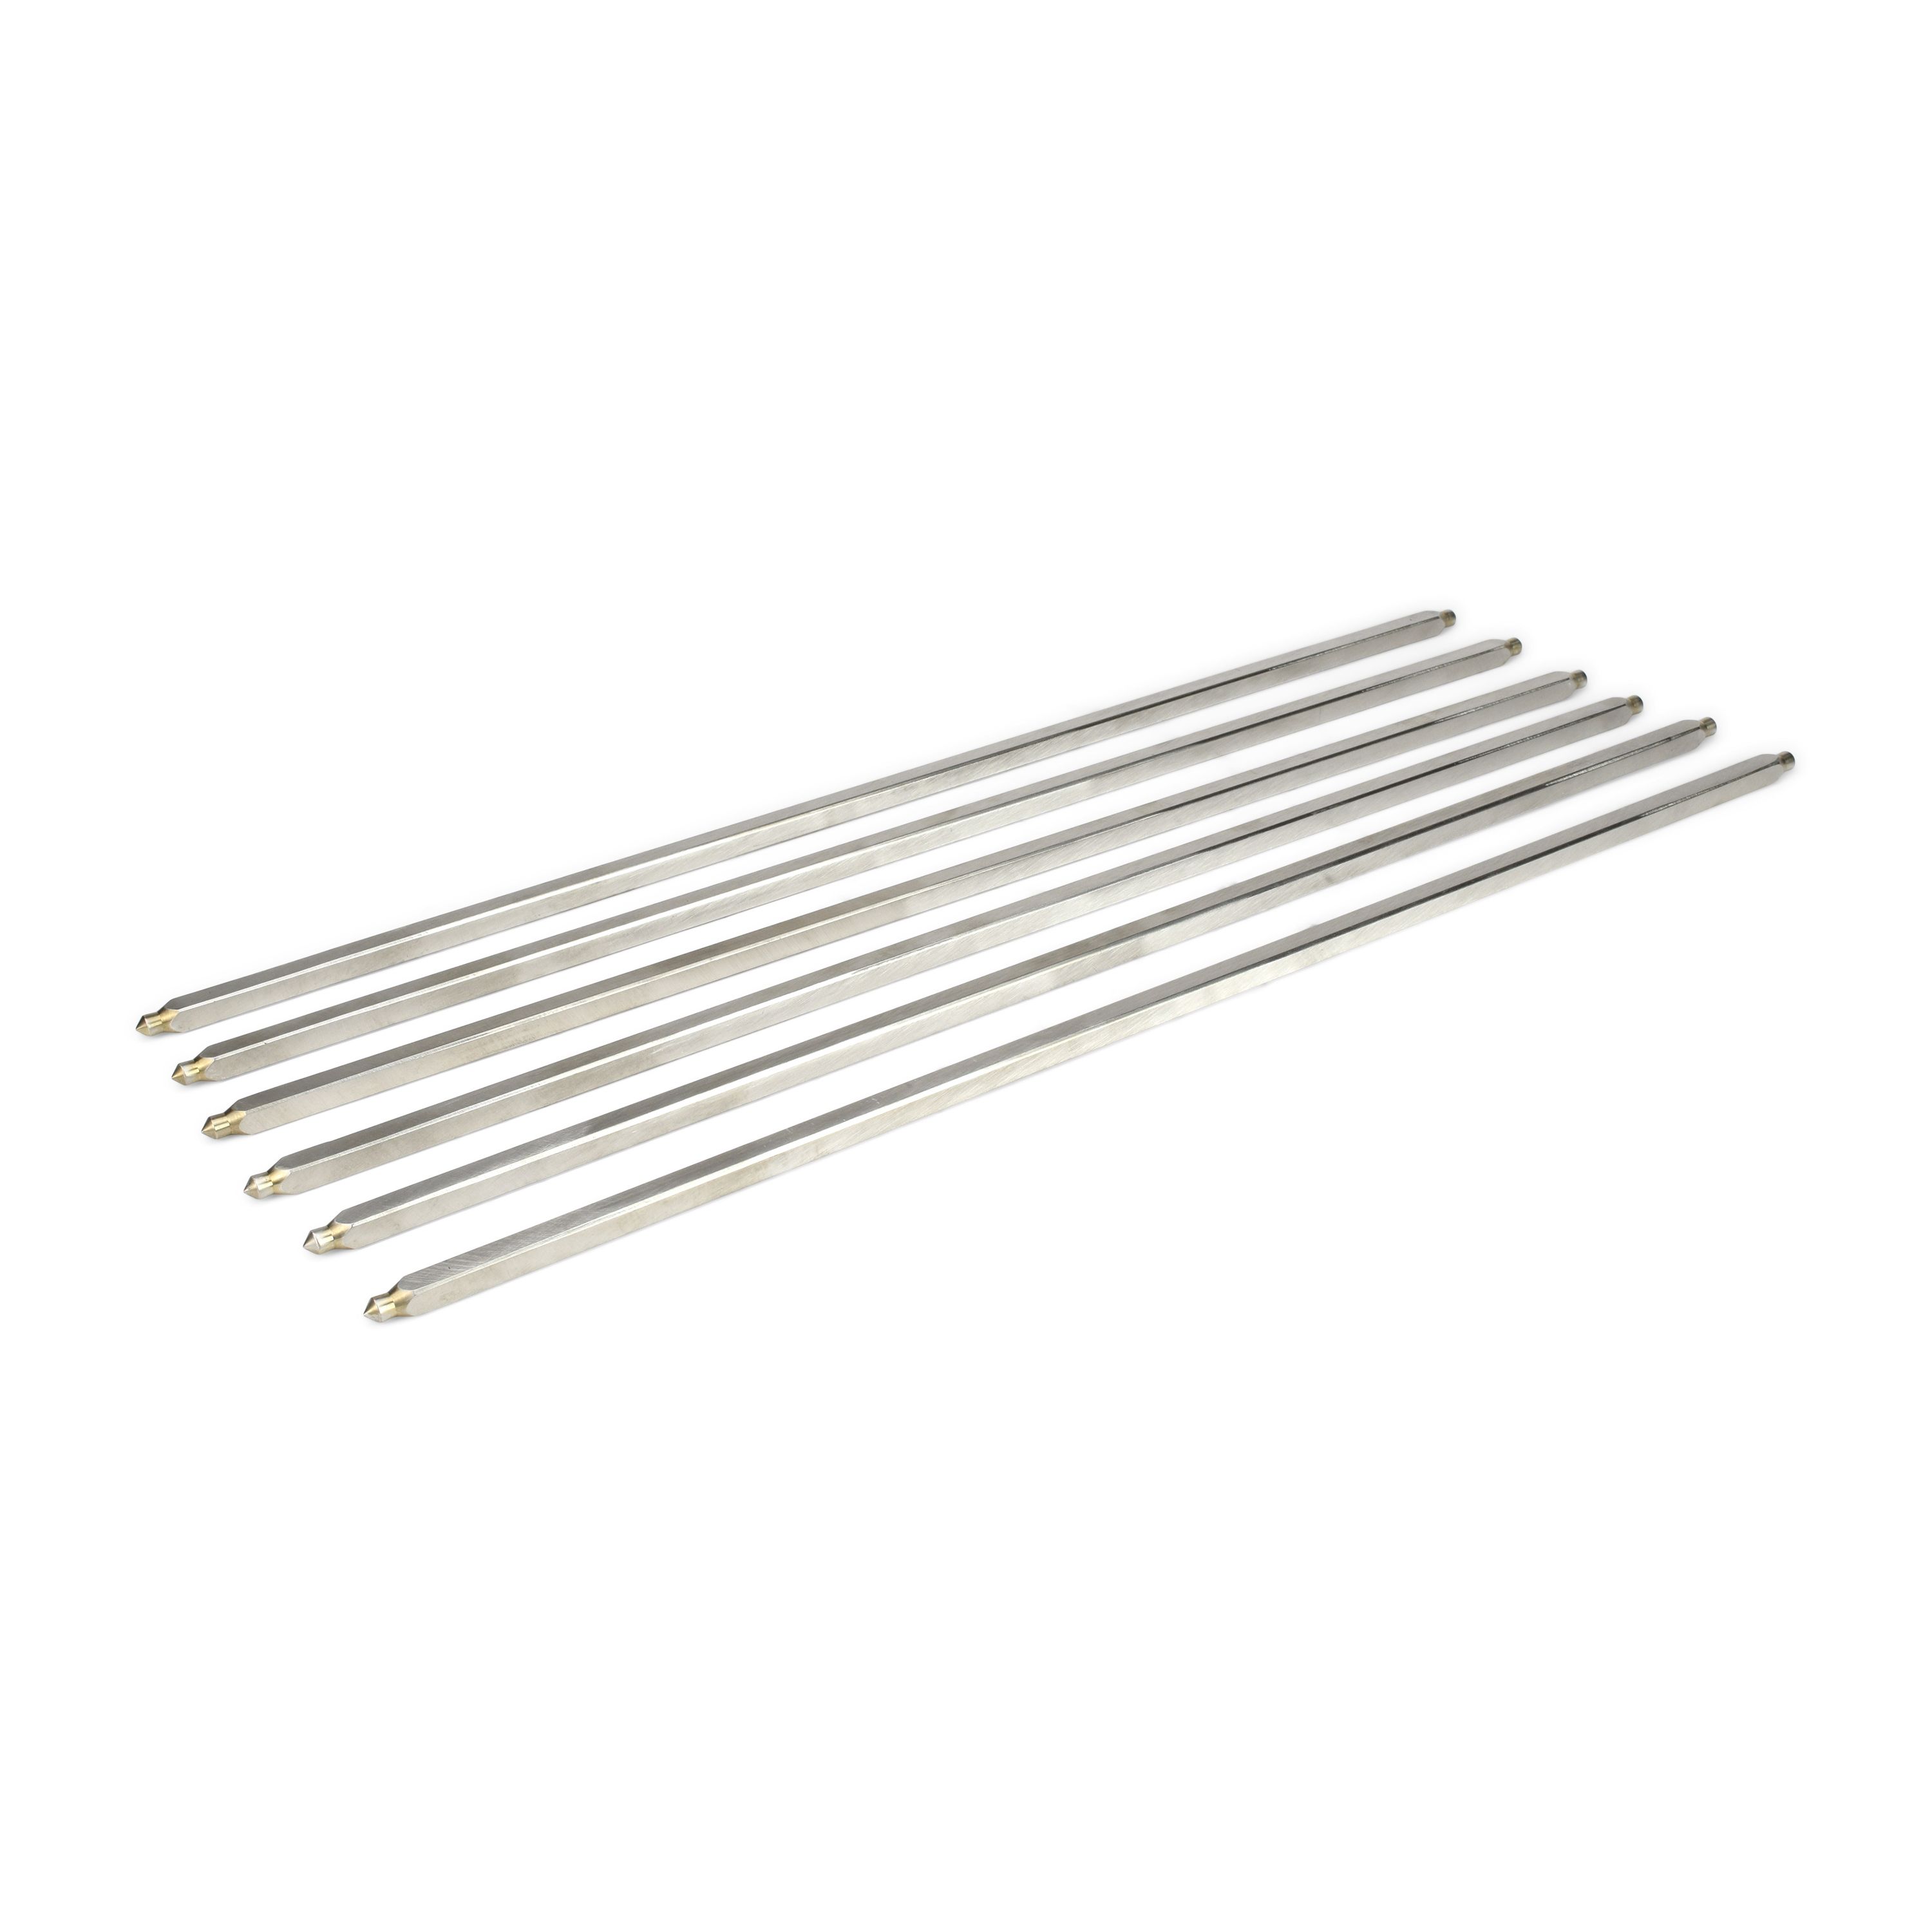 6 pieces replacement skewers stainless steel